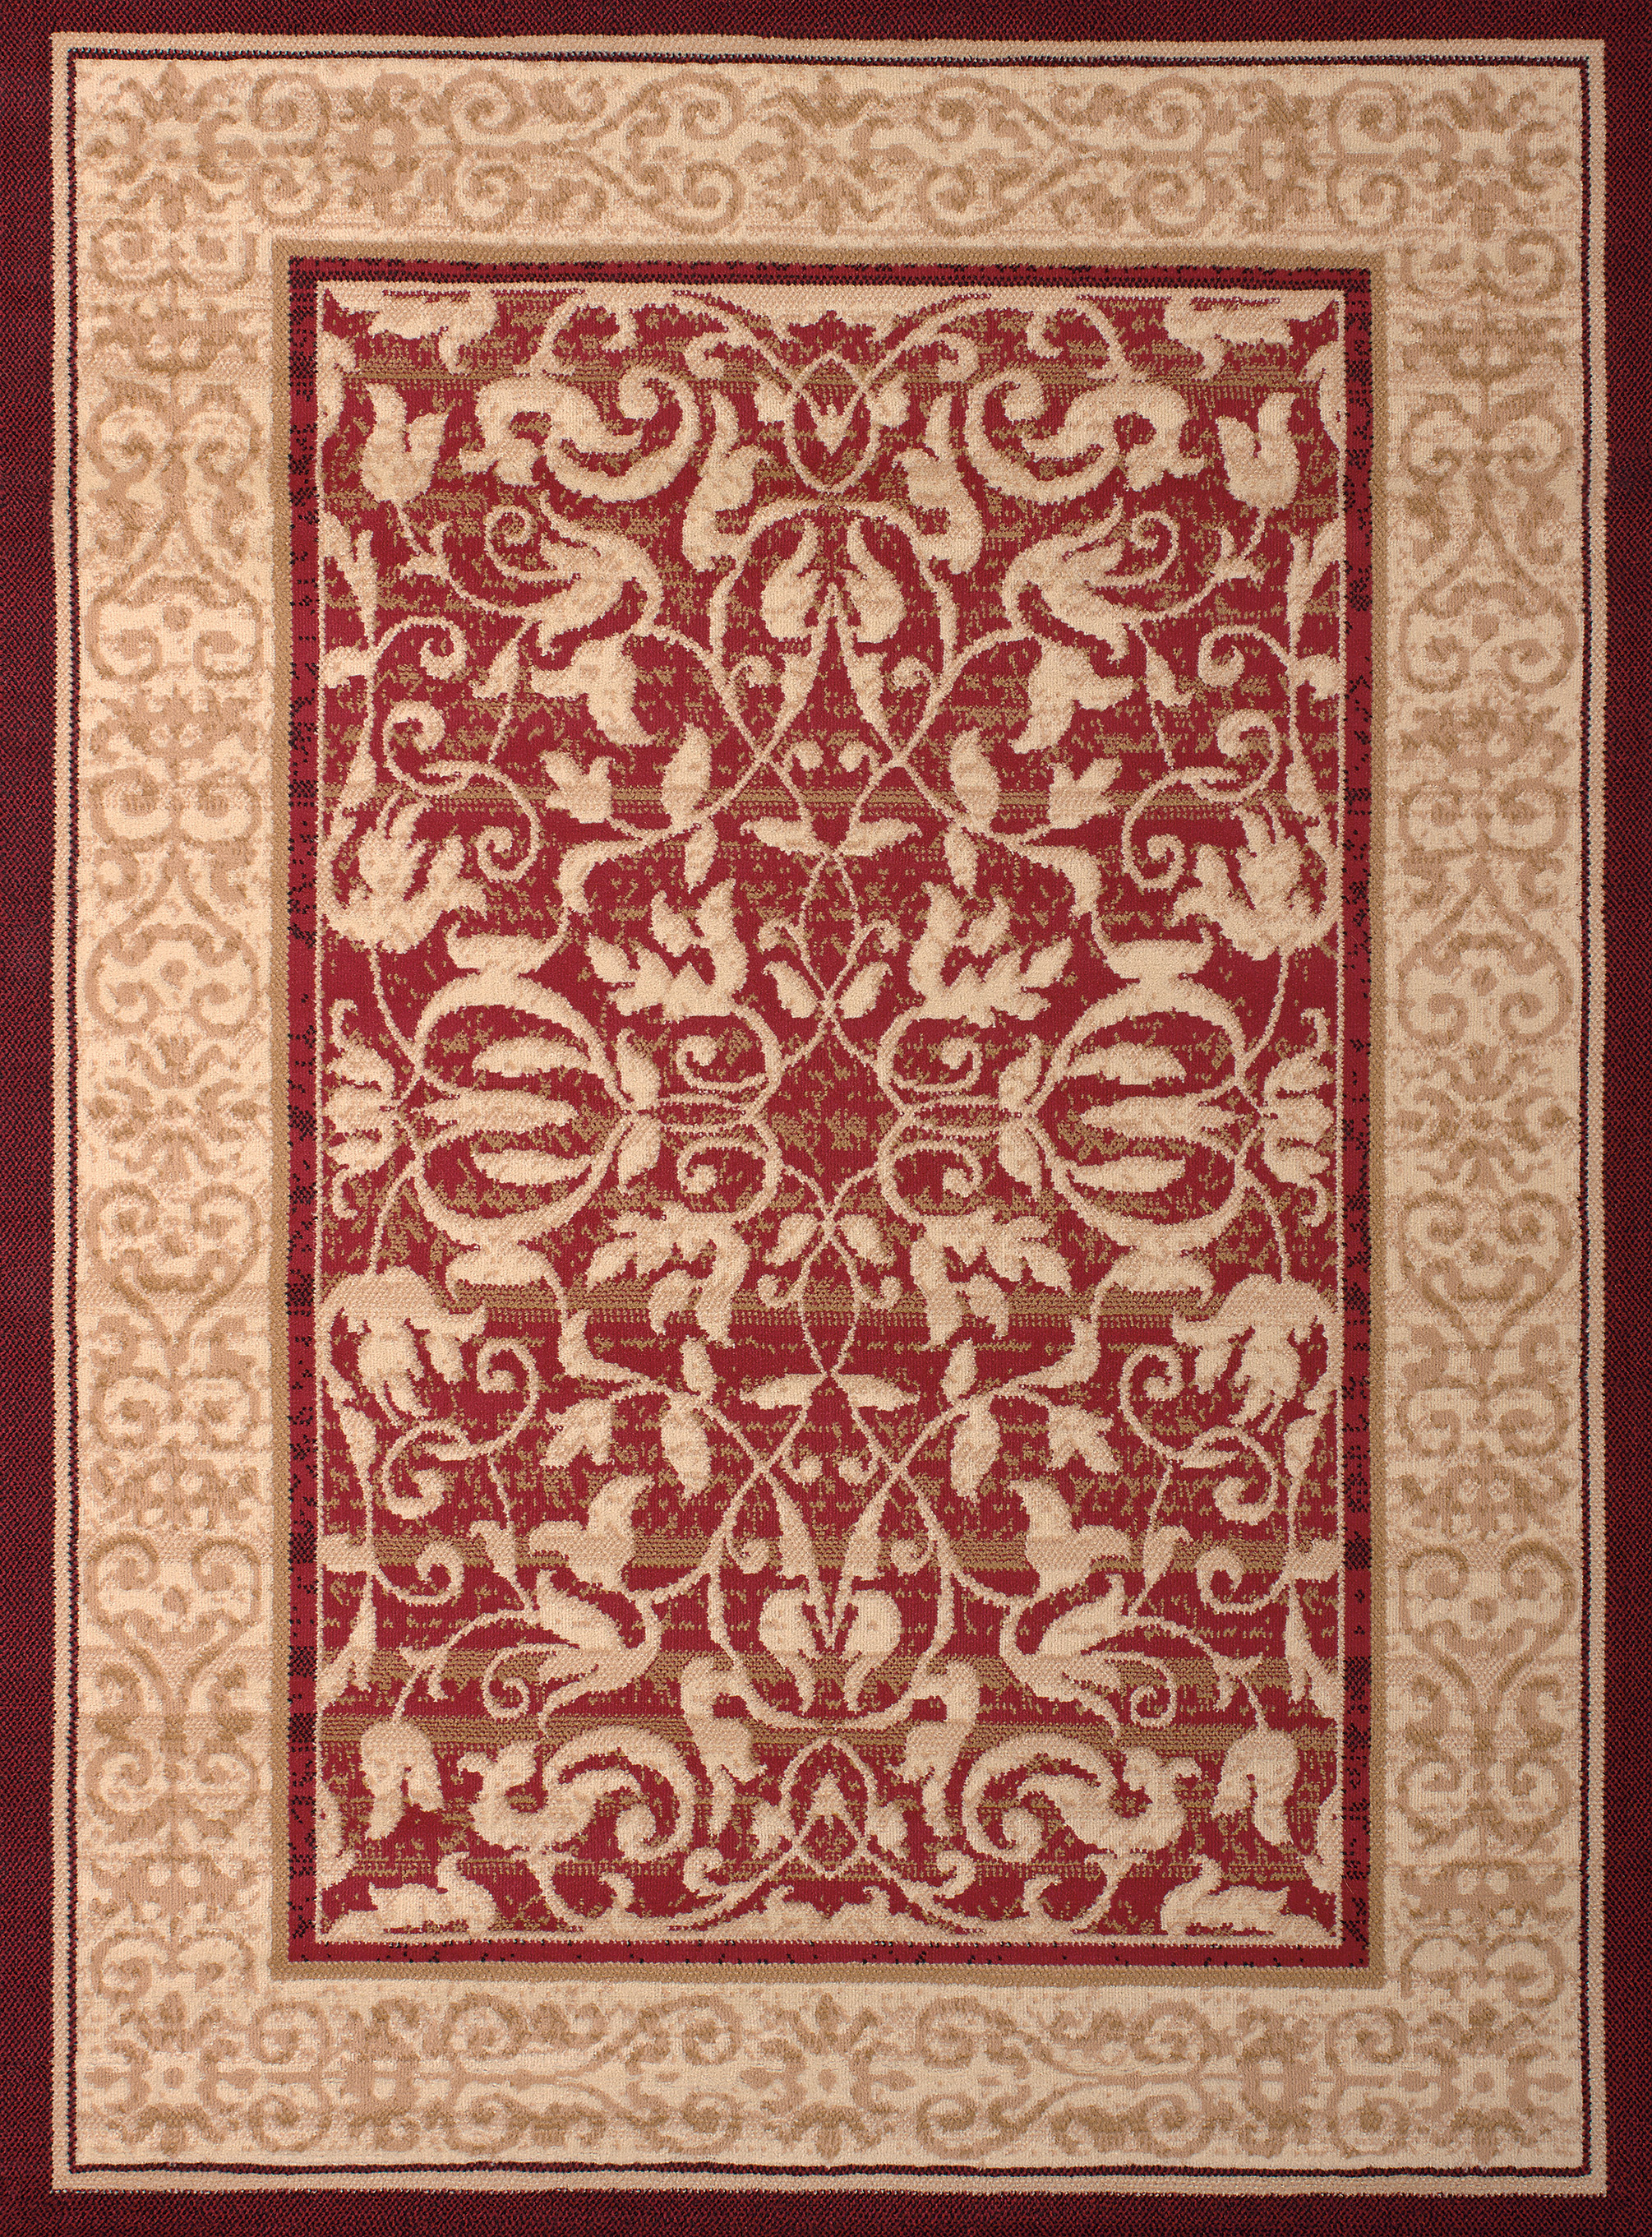 United Weavers Plaza Genevieve Accent Rug, Bordered Pattern, Red, 1'11" X 3'3" - image 5 of 6